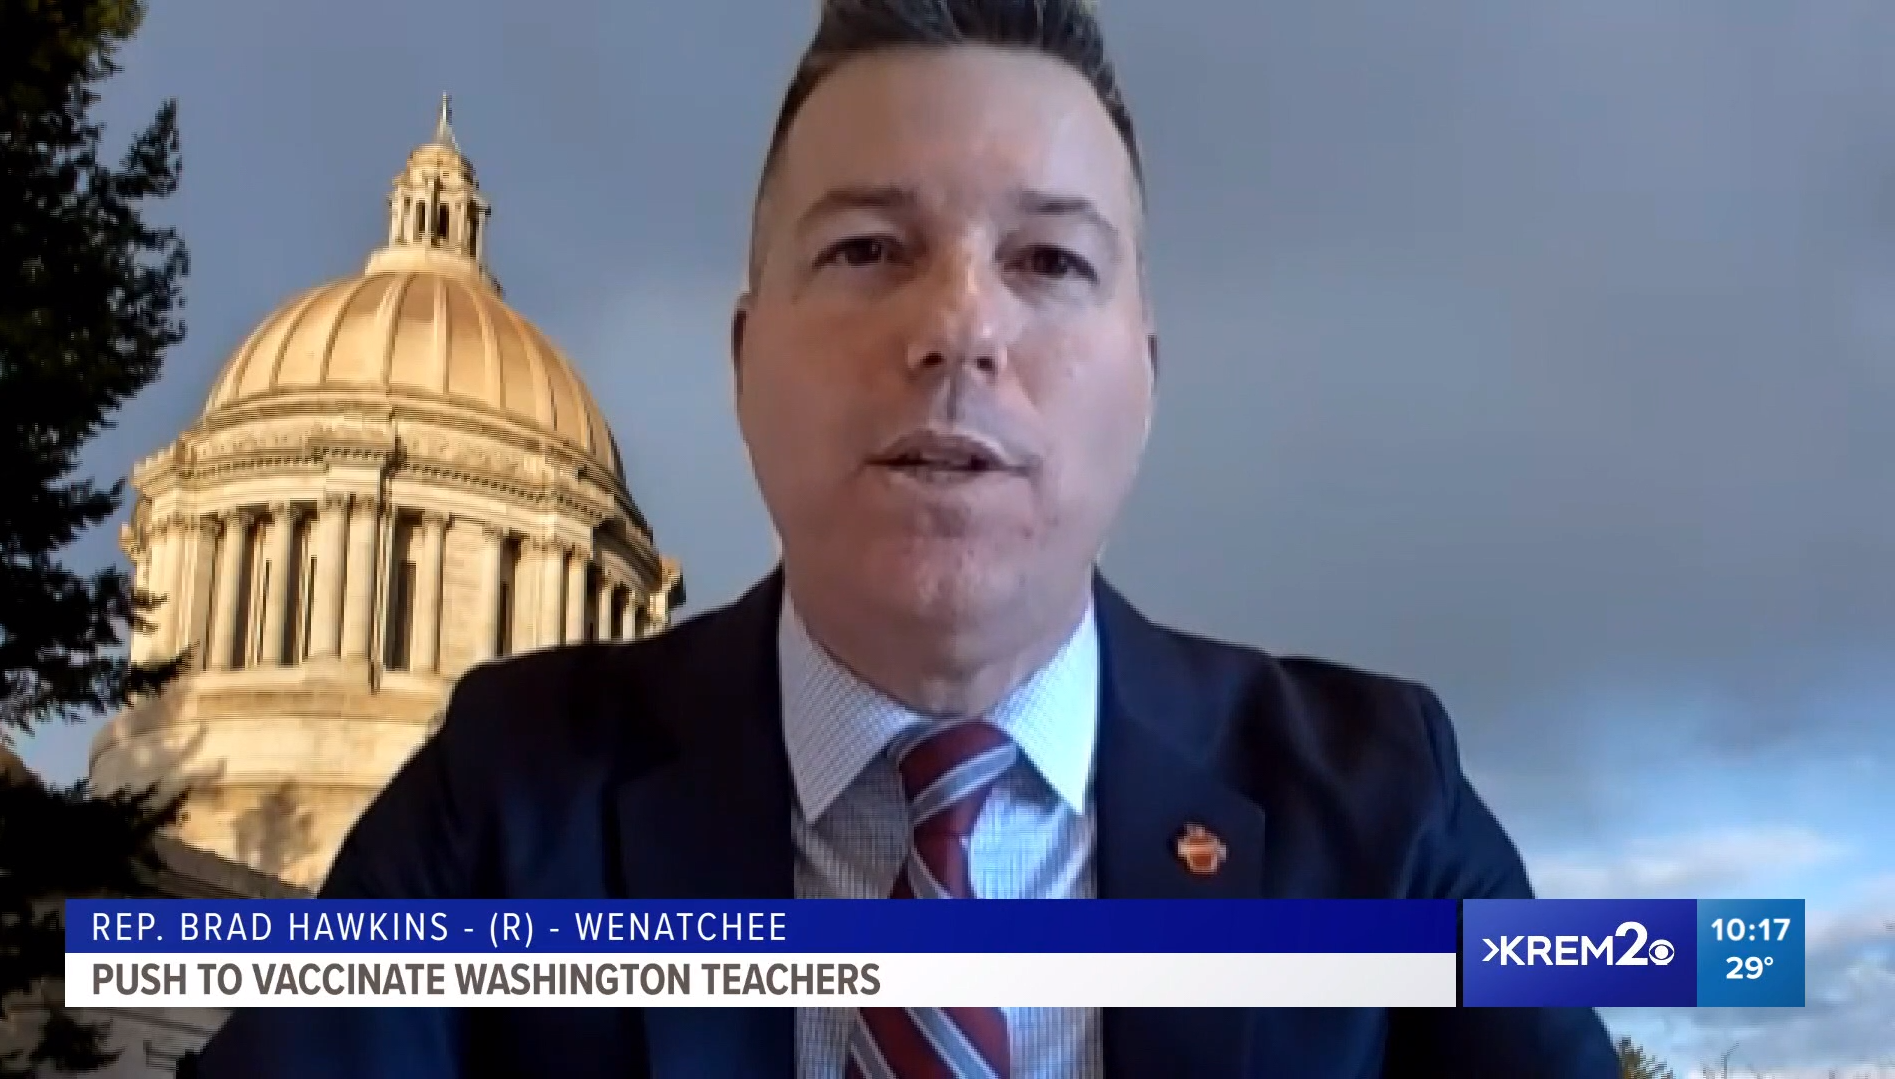 VIDEO: KREM: Washington lawmakers push to vaccinate school employees more quickly